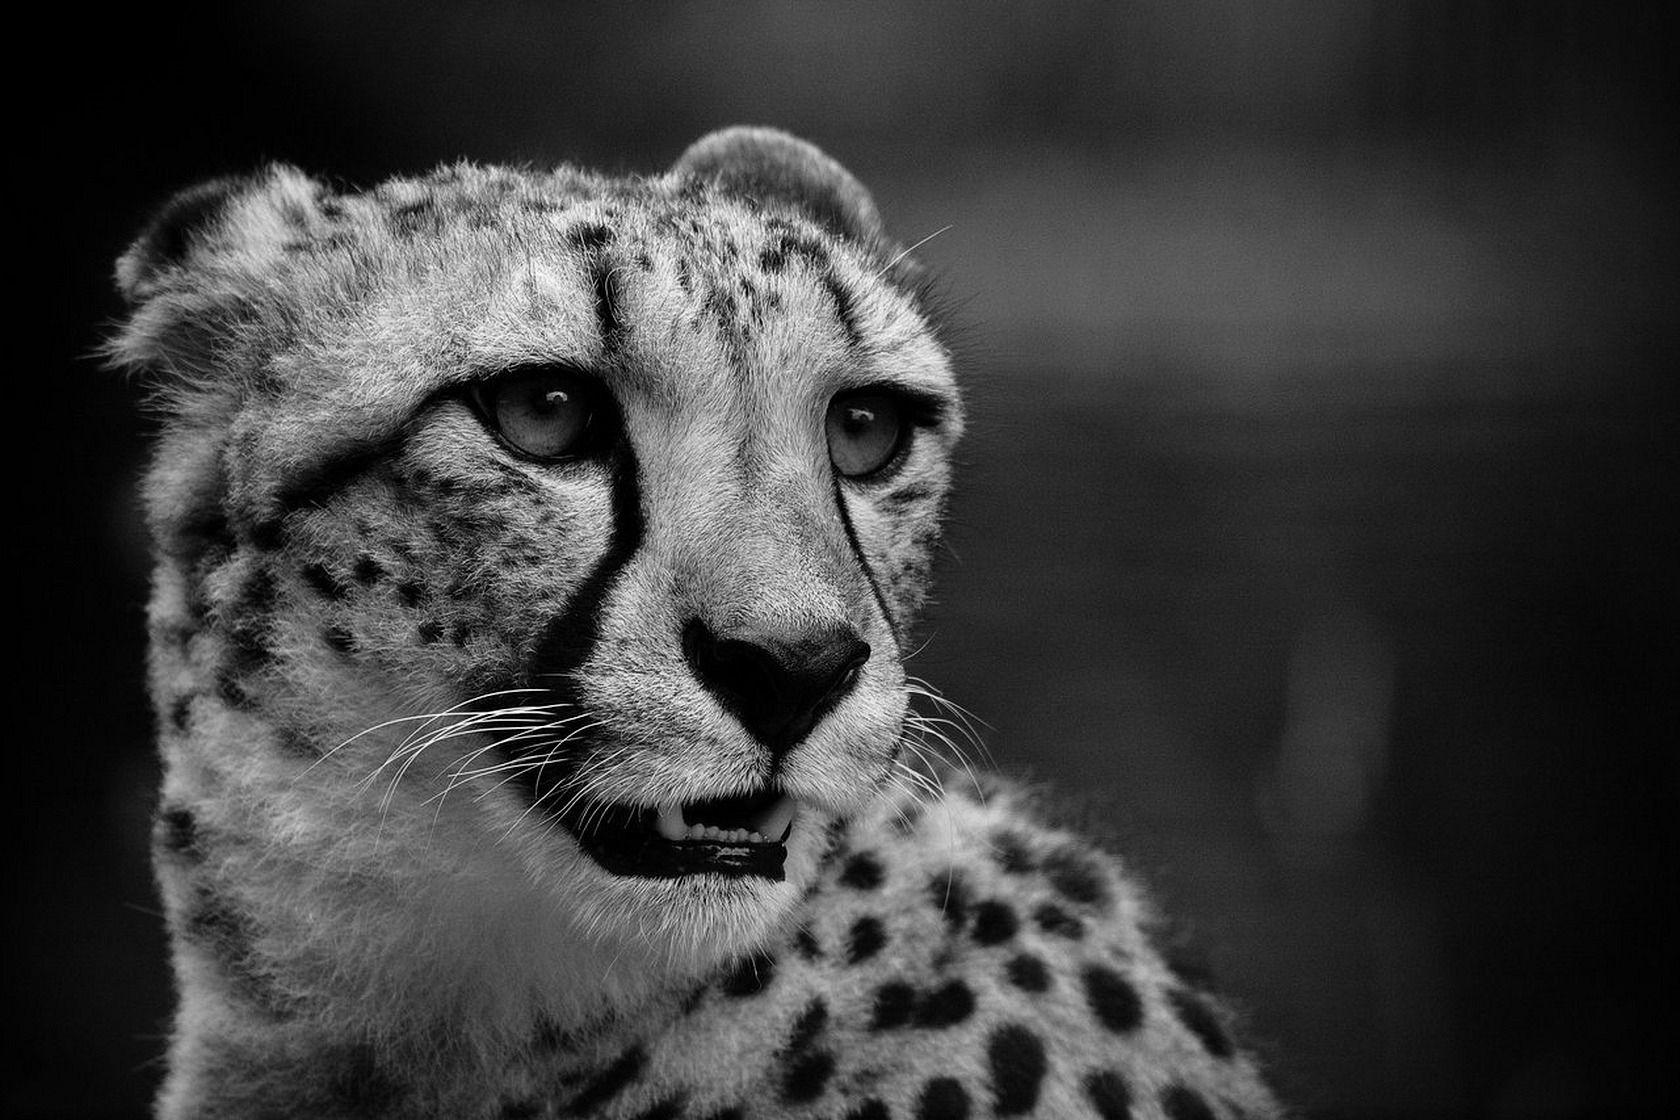 Black and White Cheetah Wallpapers - Top Free Black and White Cheetah ...